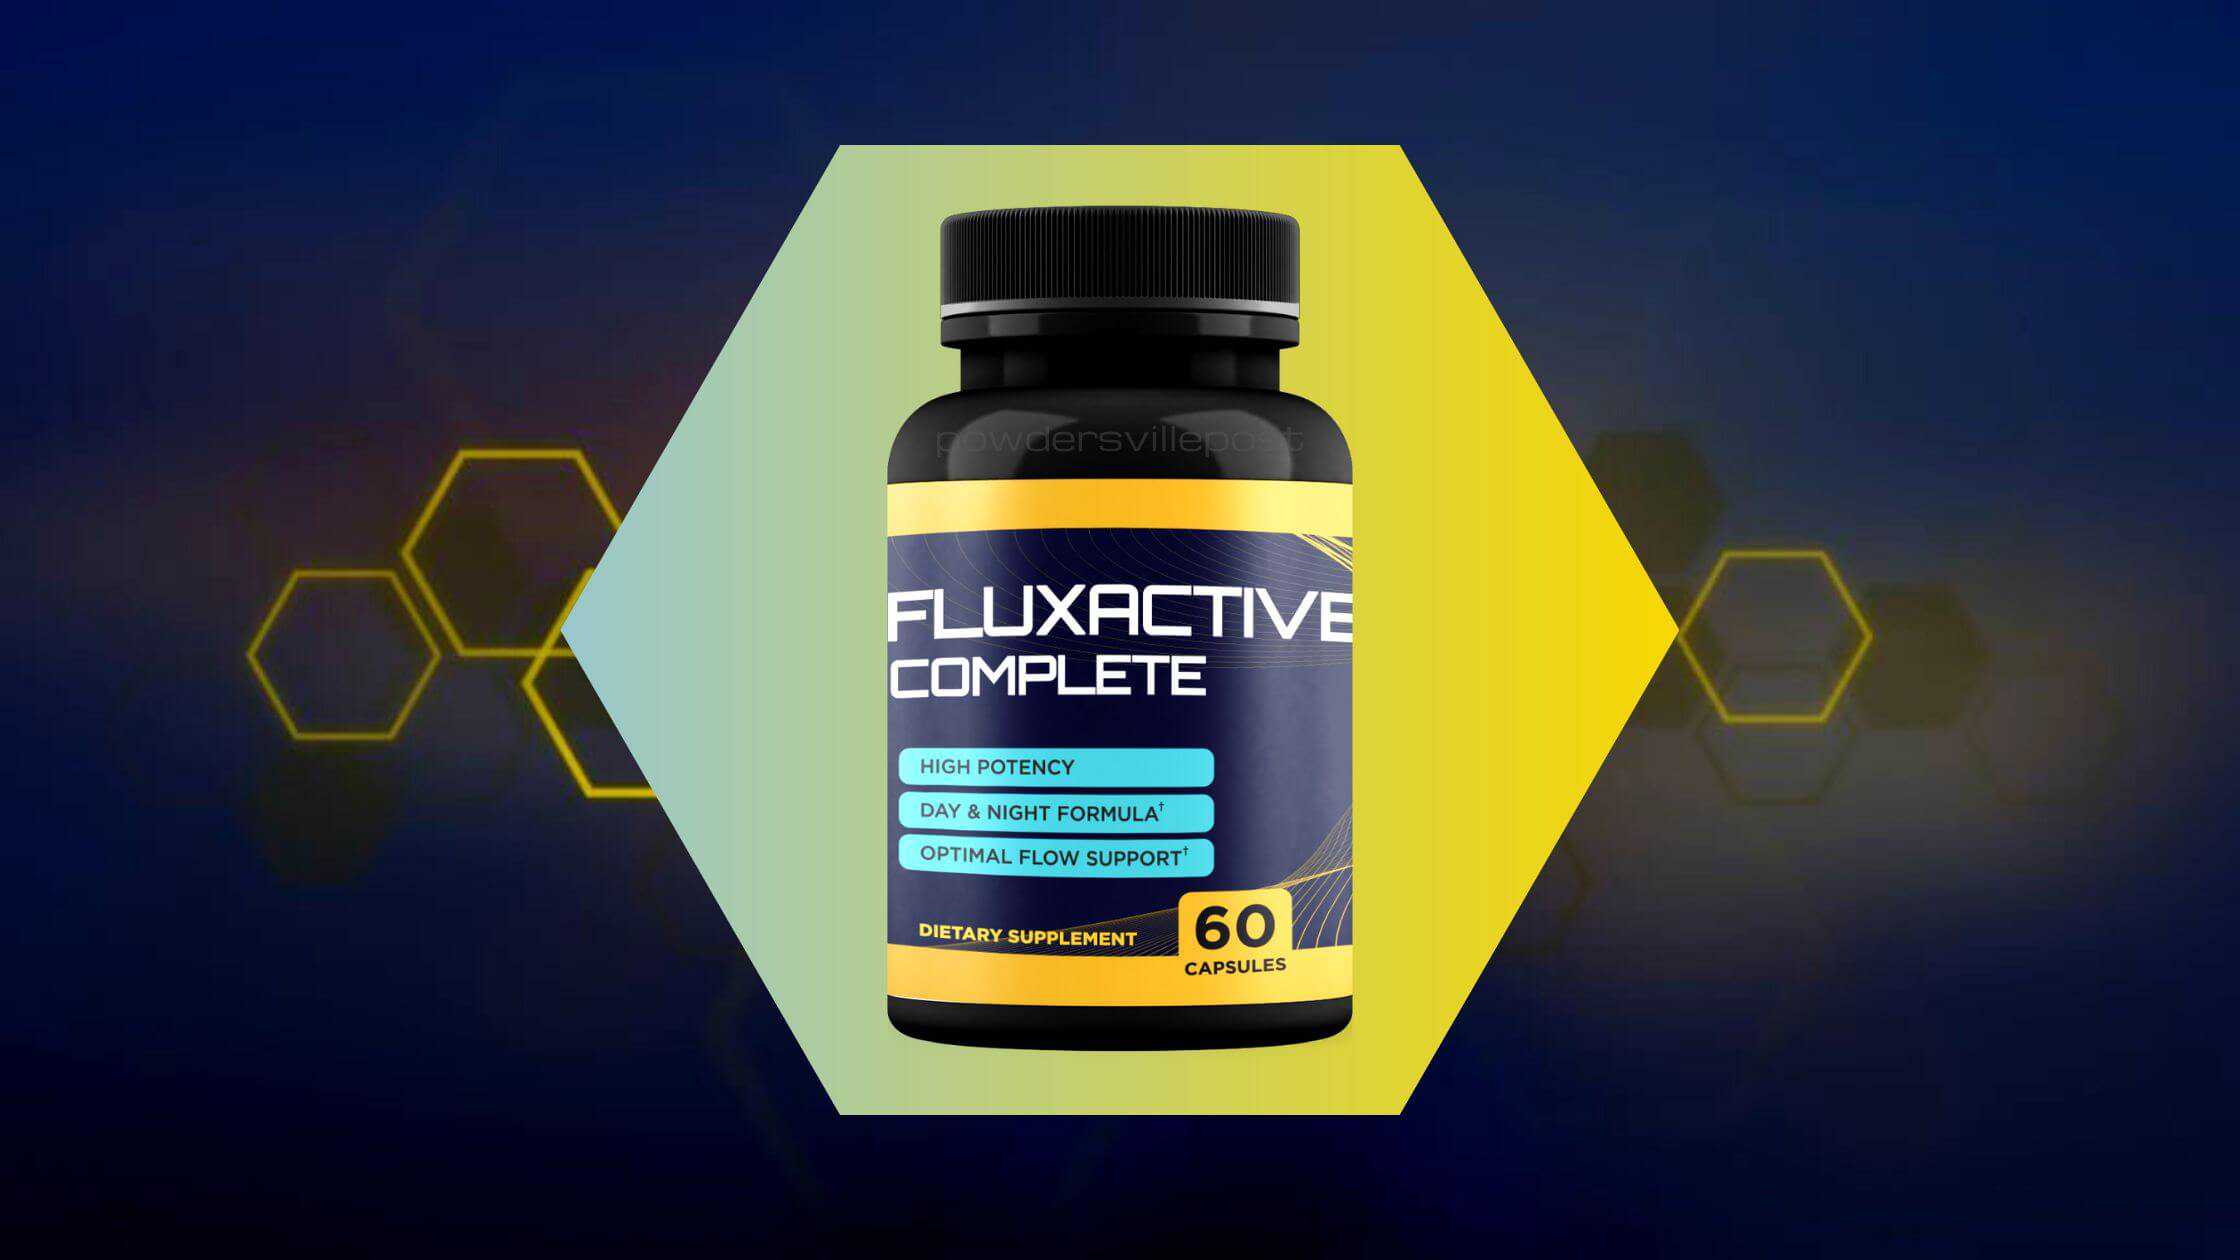 Fluxactive Complete Reviews: Does This Gluten-Free Formula Really Work? Unveiling The TRUTH!